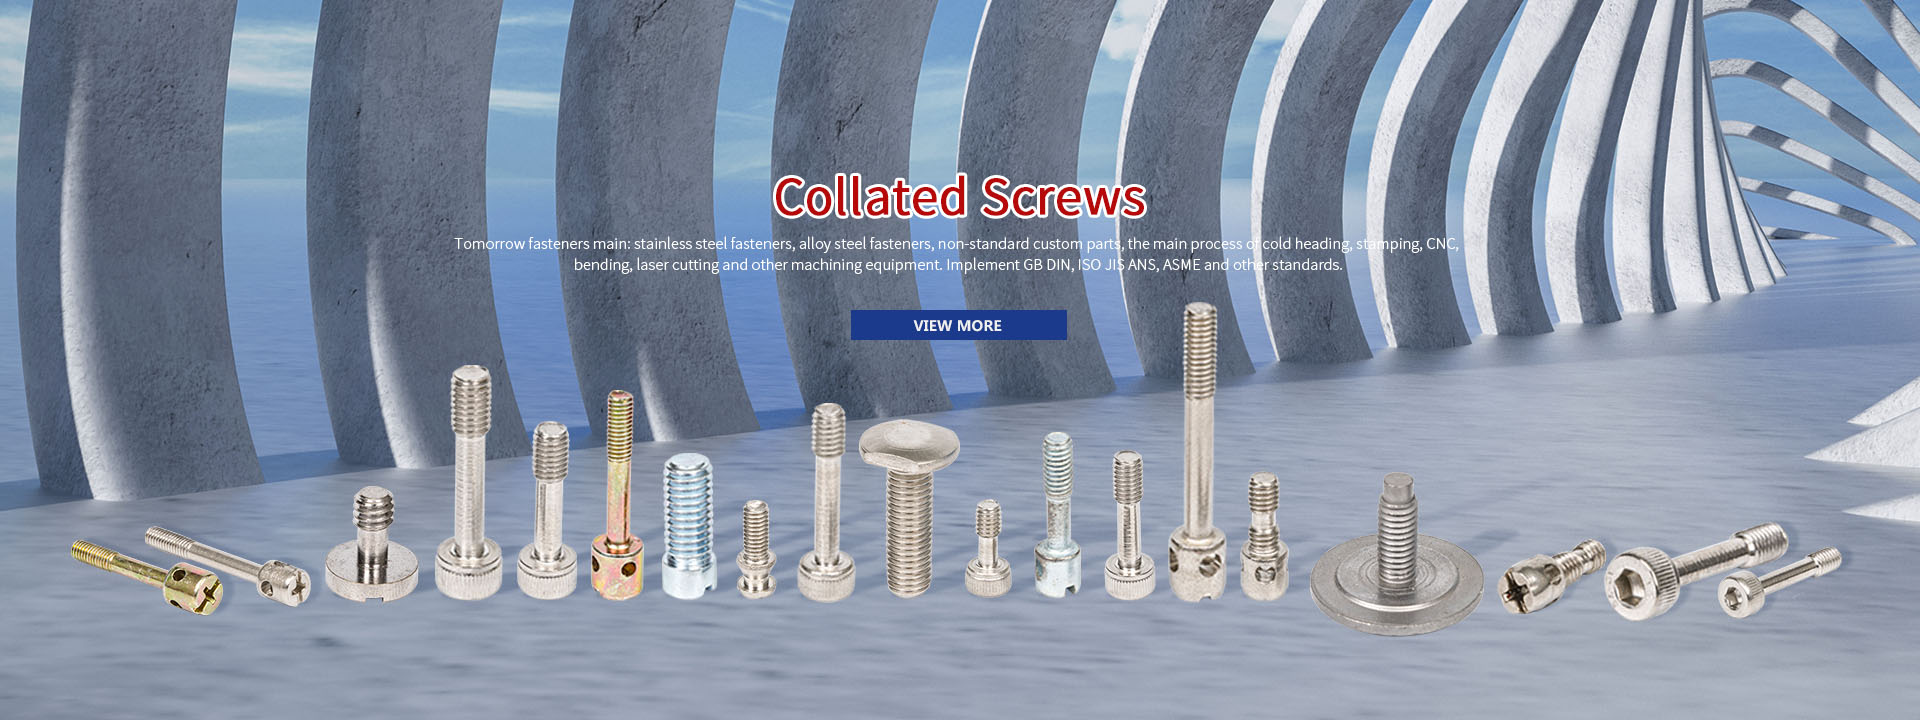 Collated Screws Suppliers